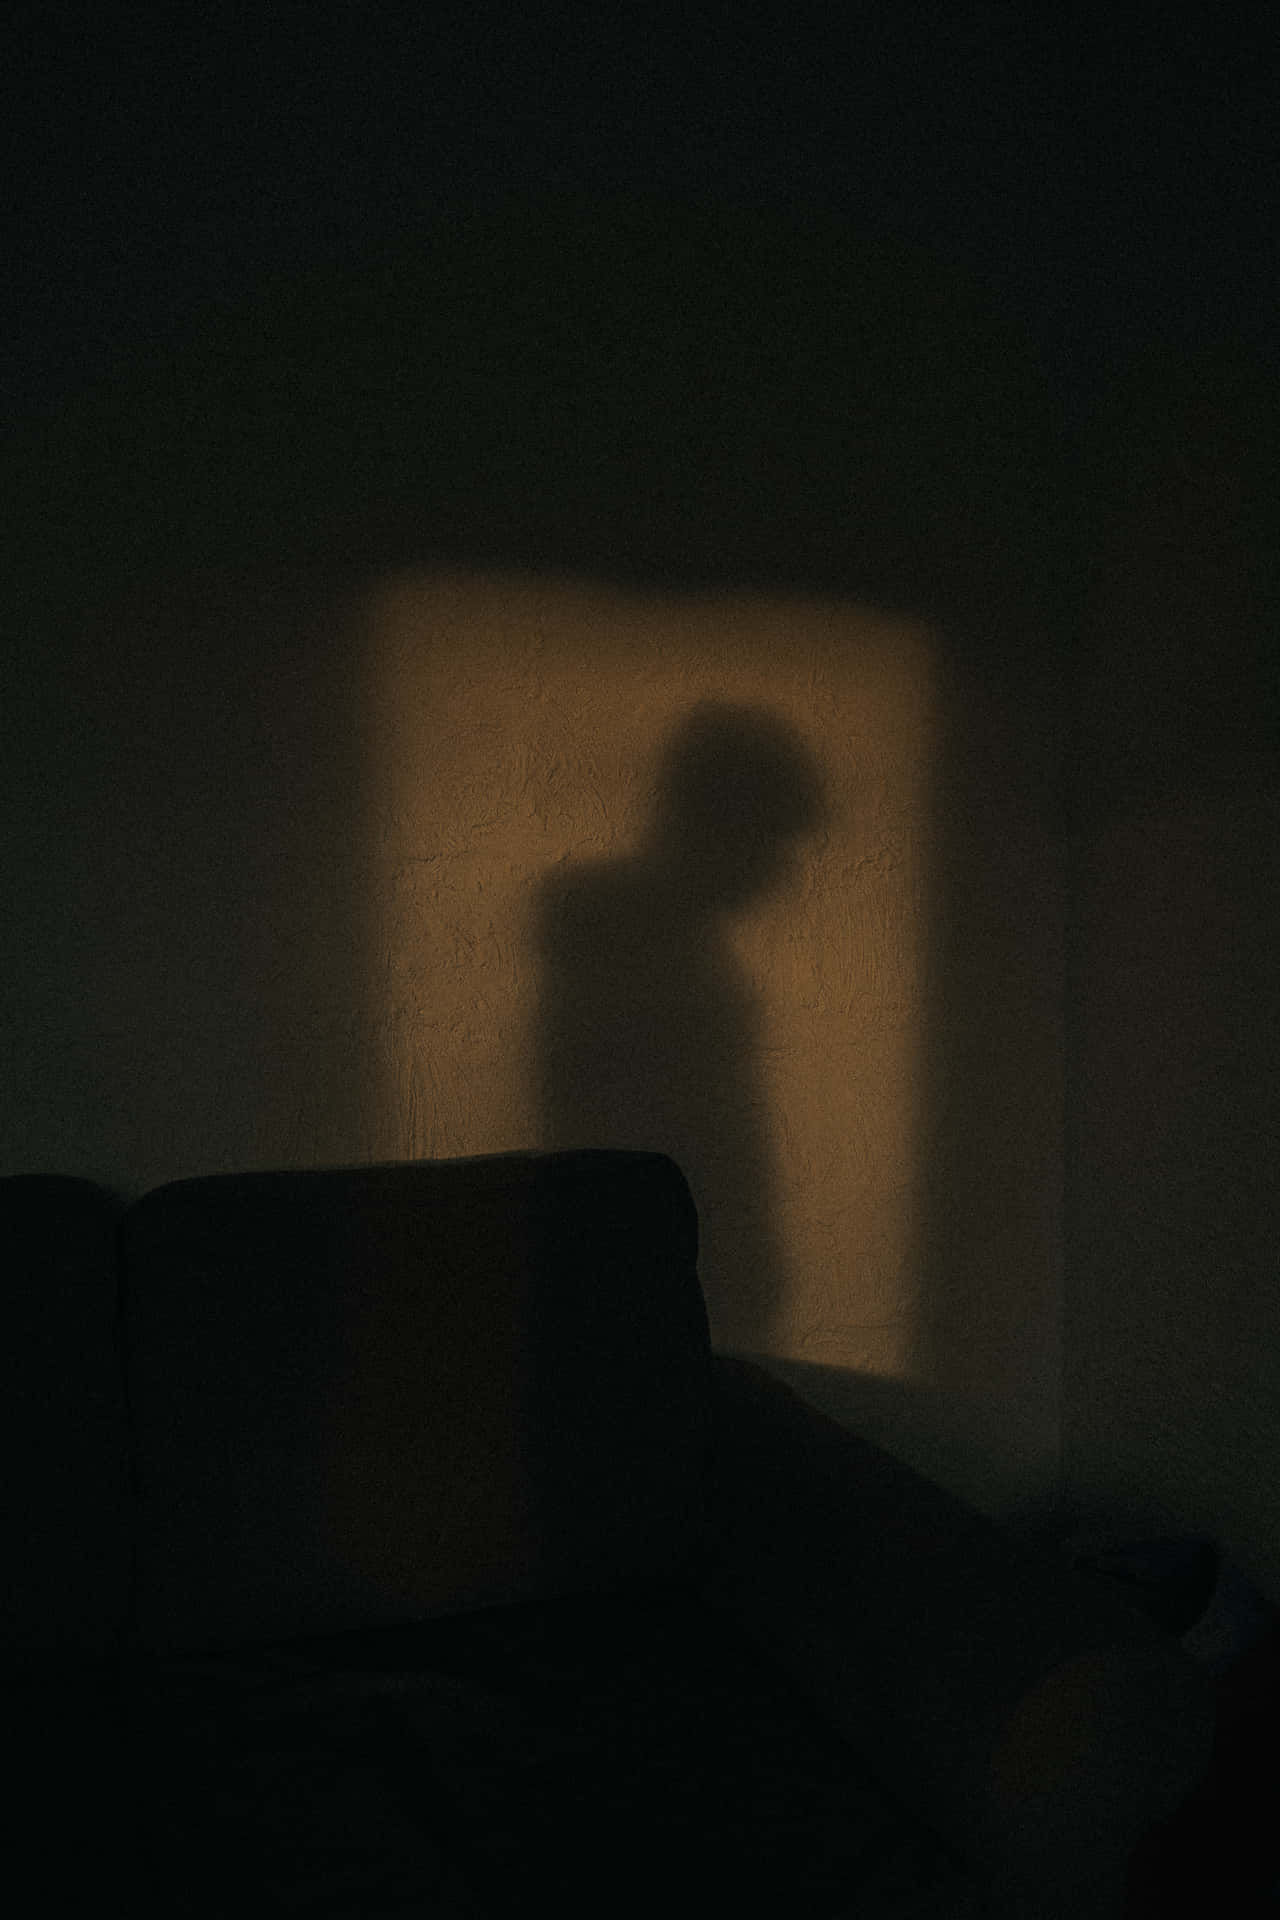 A Shadow Of A Person On A Couch